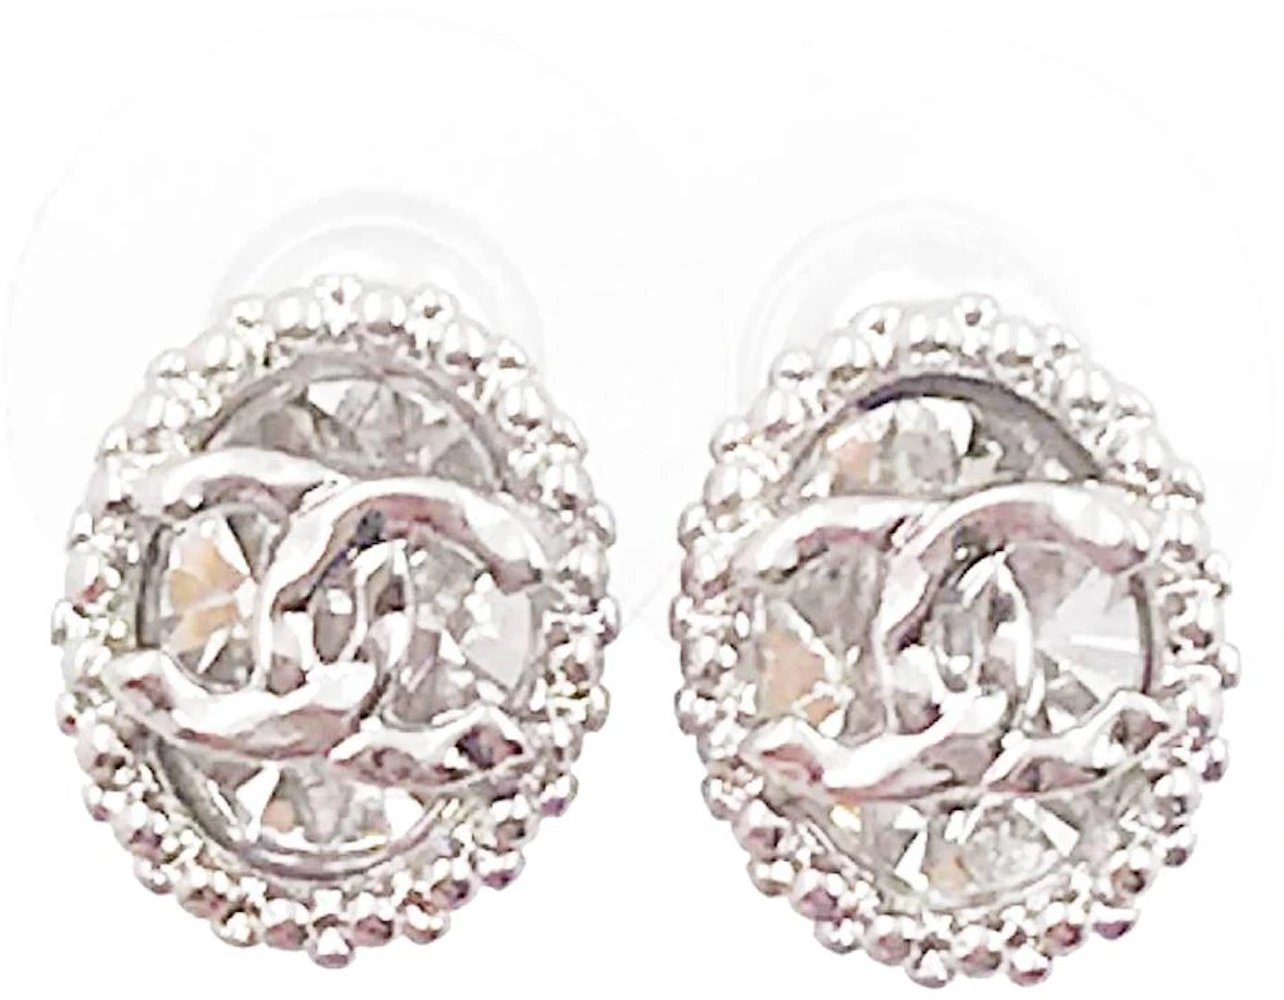 CHANEL A29400 SLIVER CRYSTAL PIERCING COSTUME EARRINGS